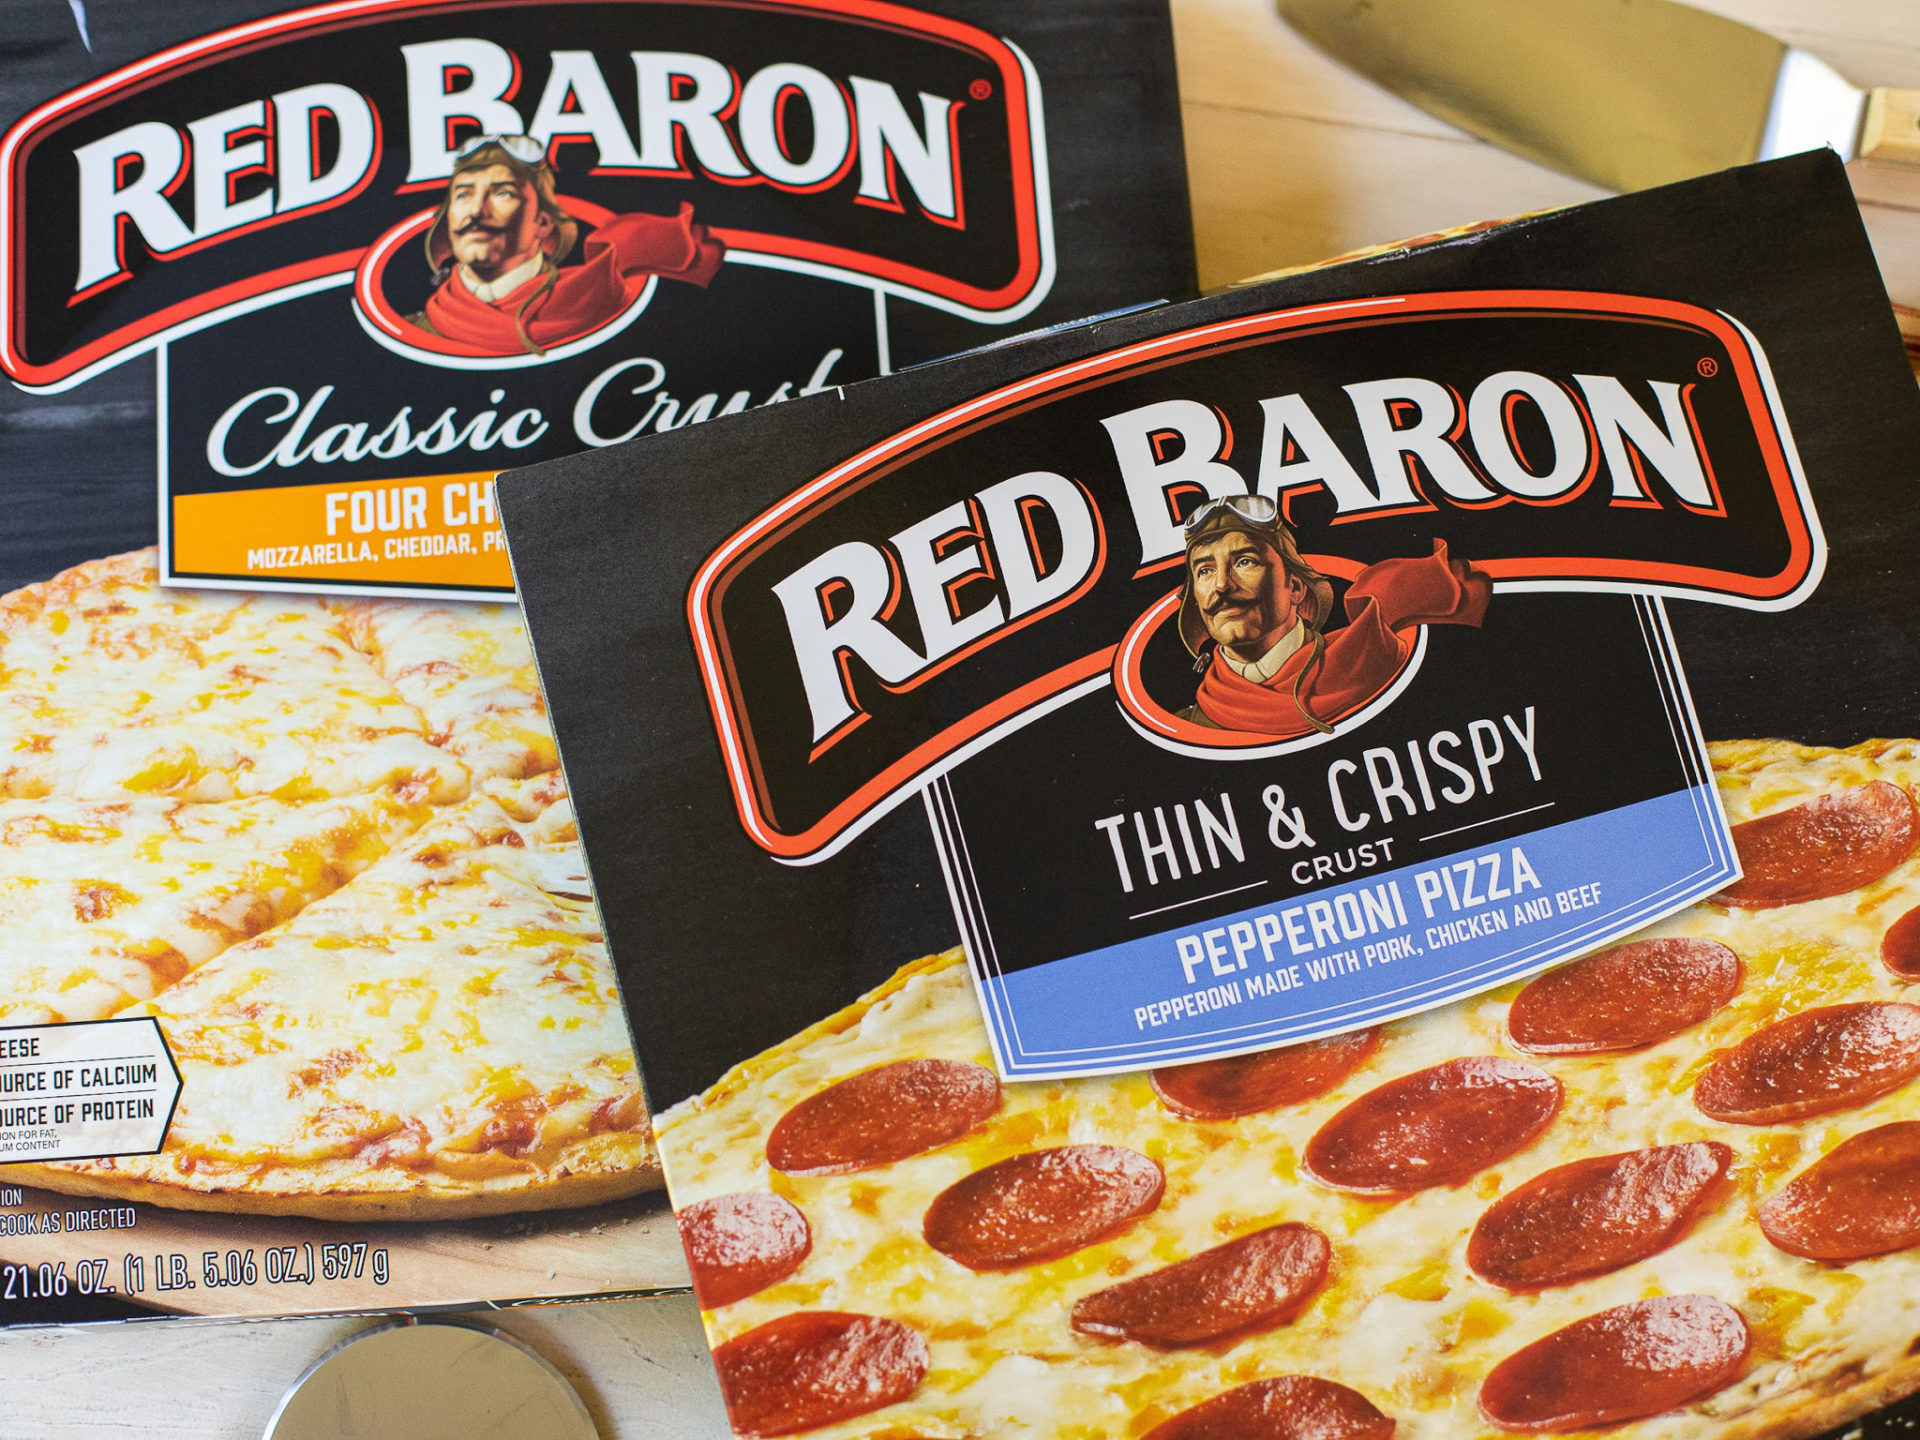 Red Baron Pizza Just $2.97 At Kroger